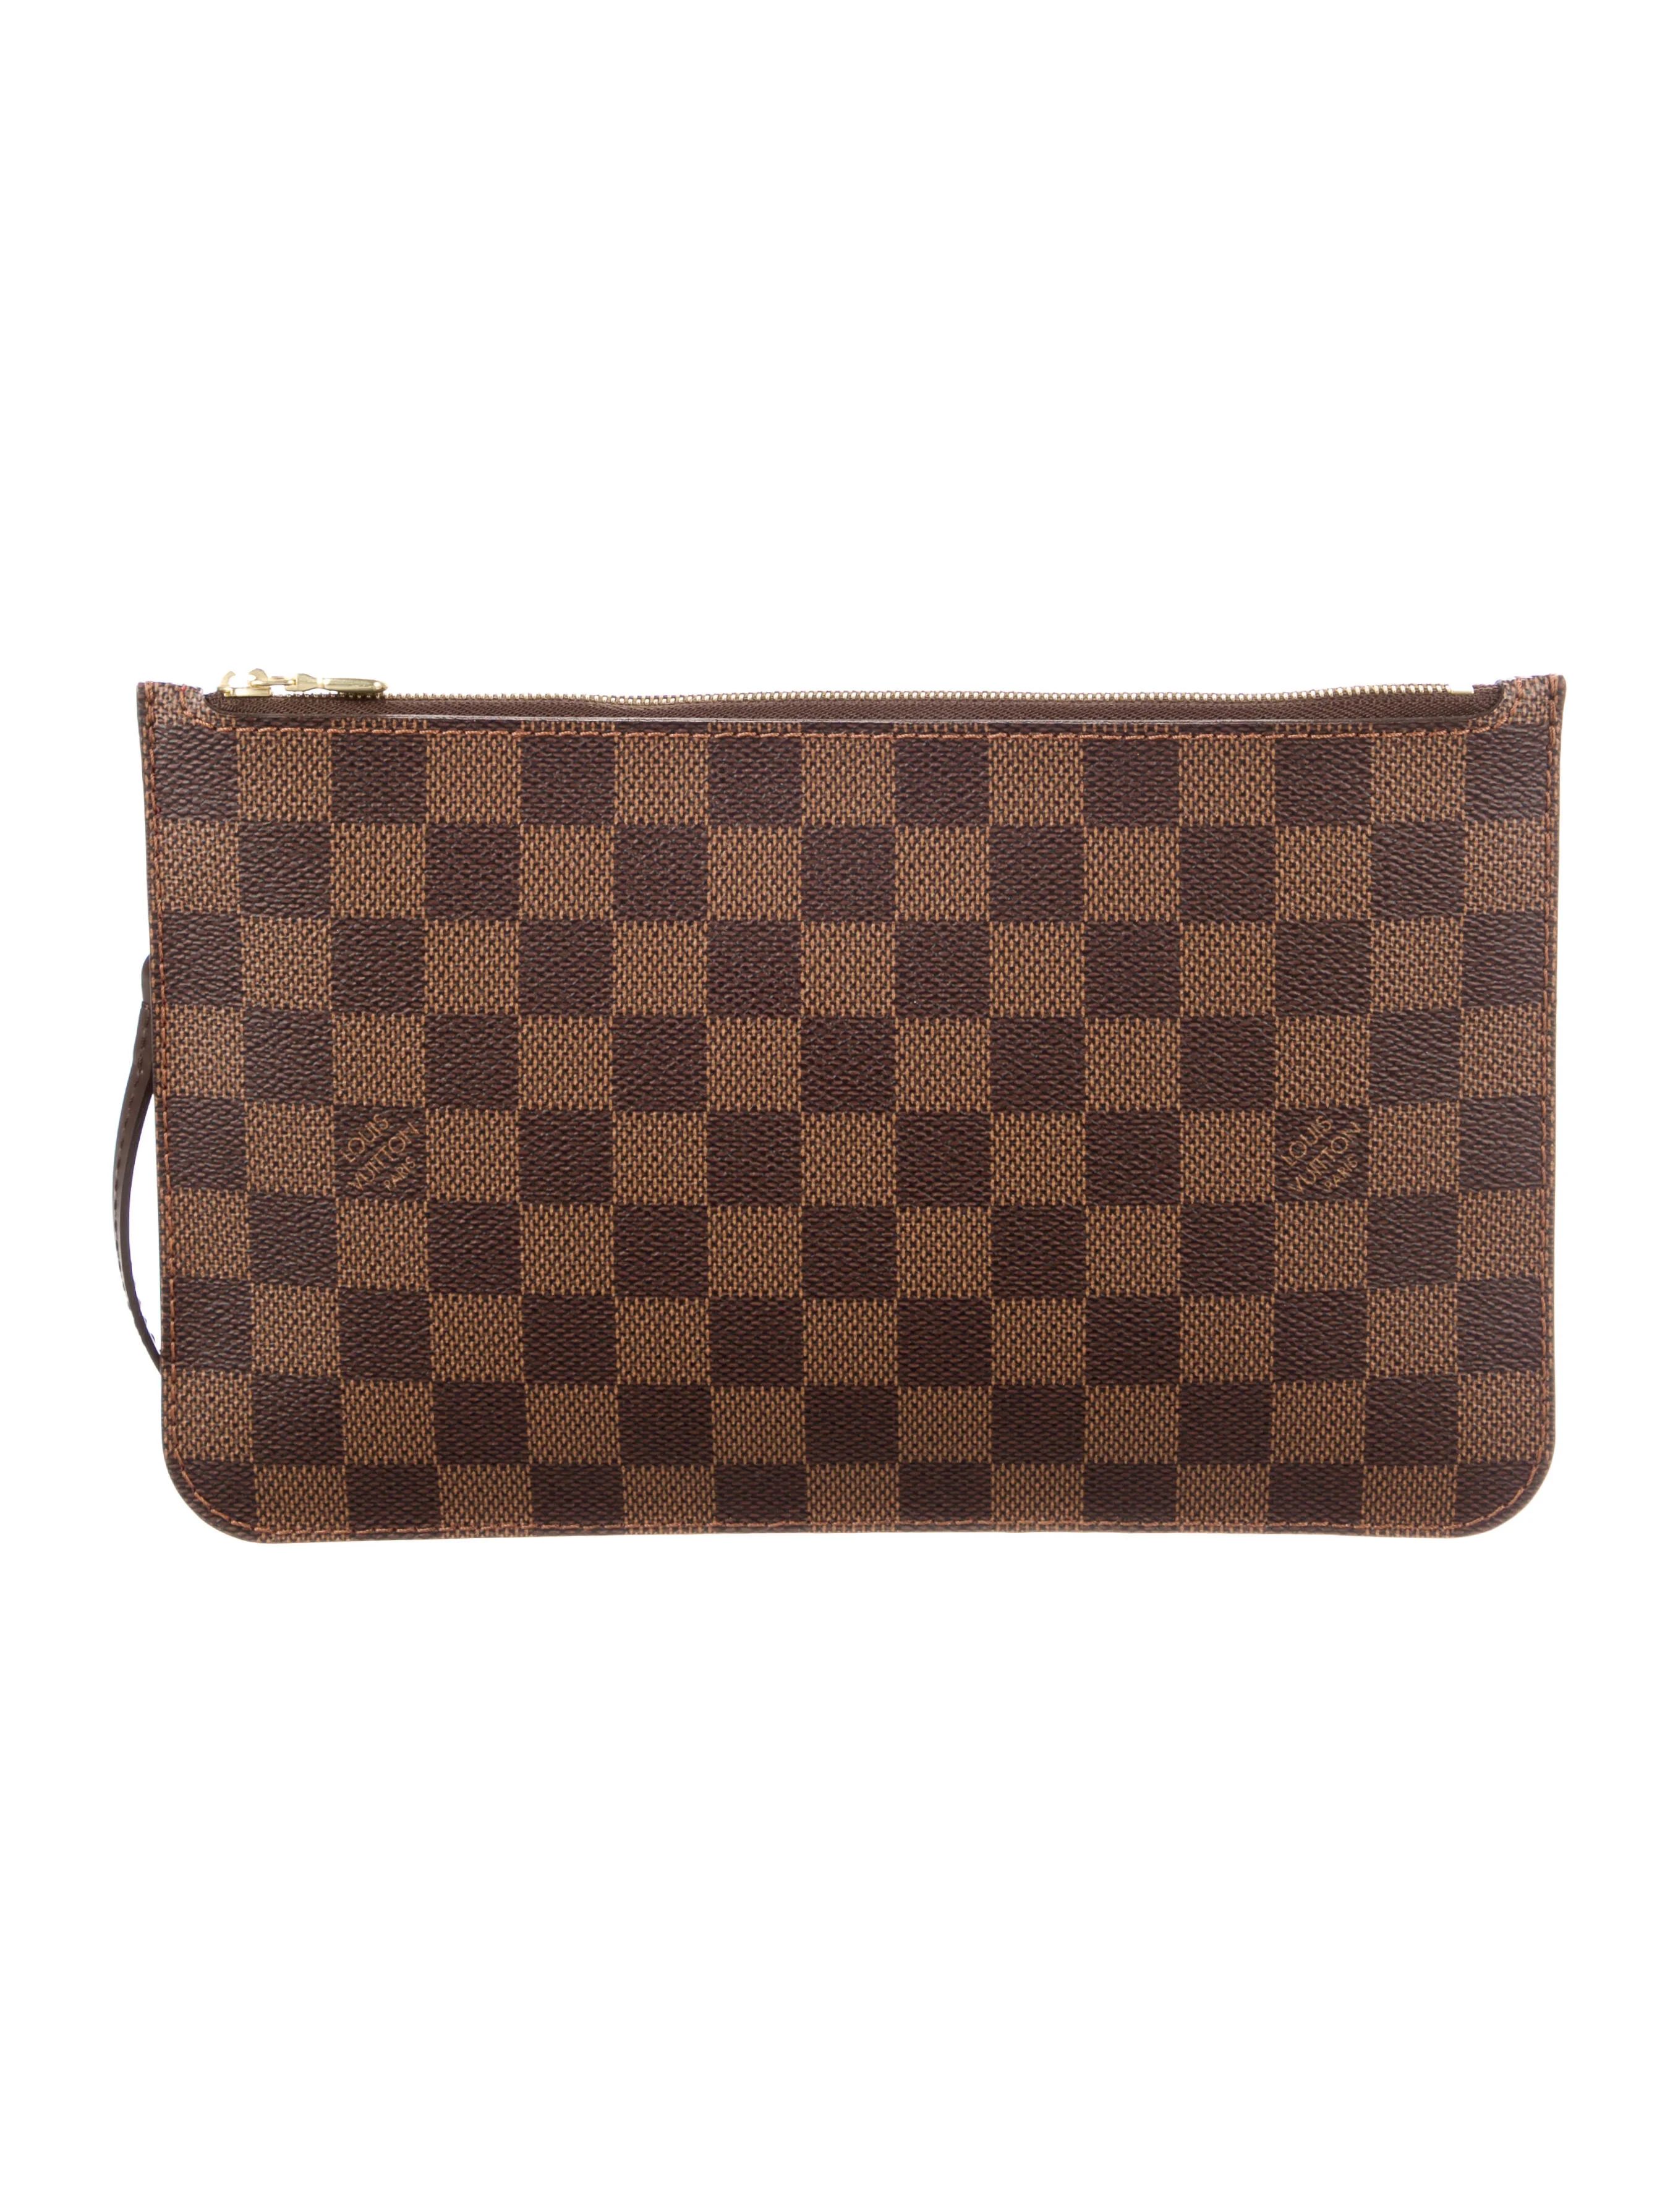 Monogram Neverfull Pouch | The RealReal